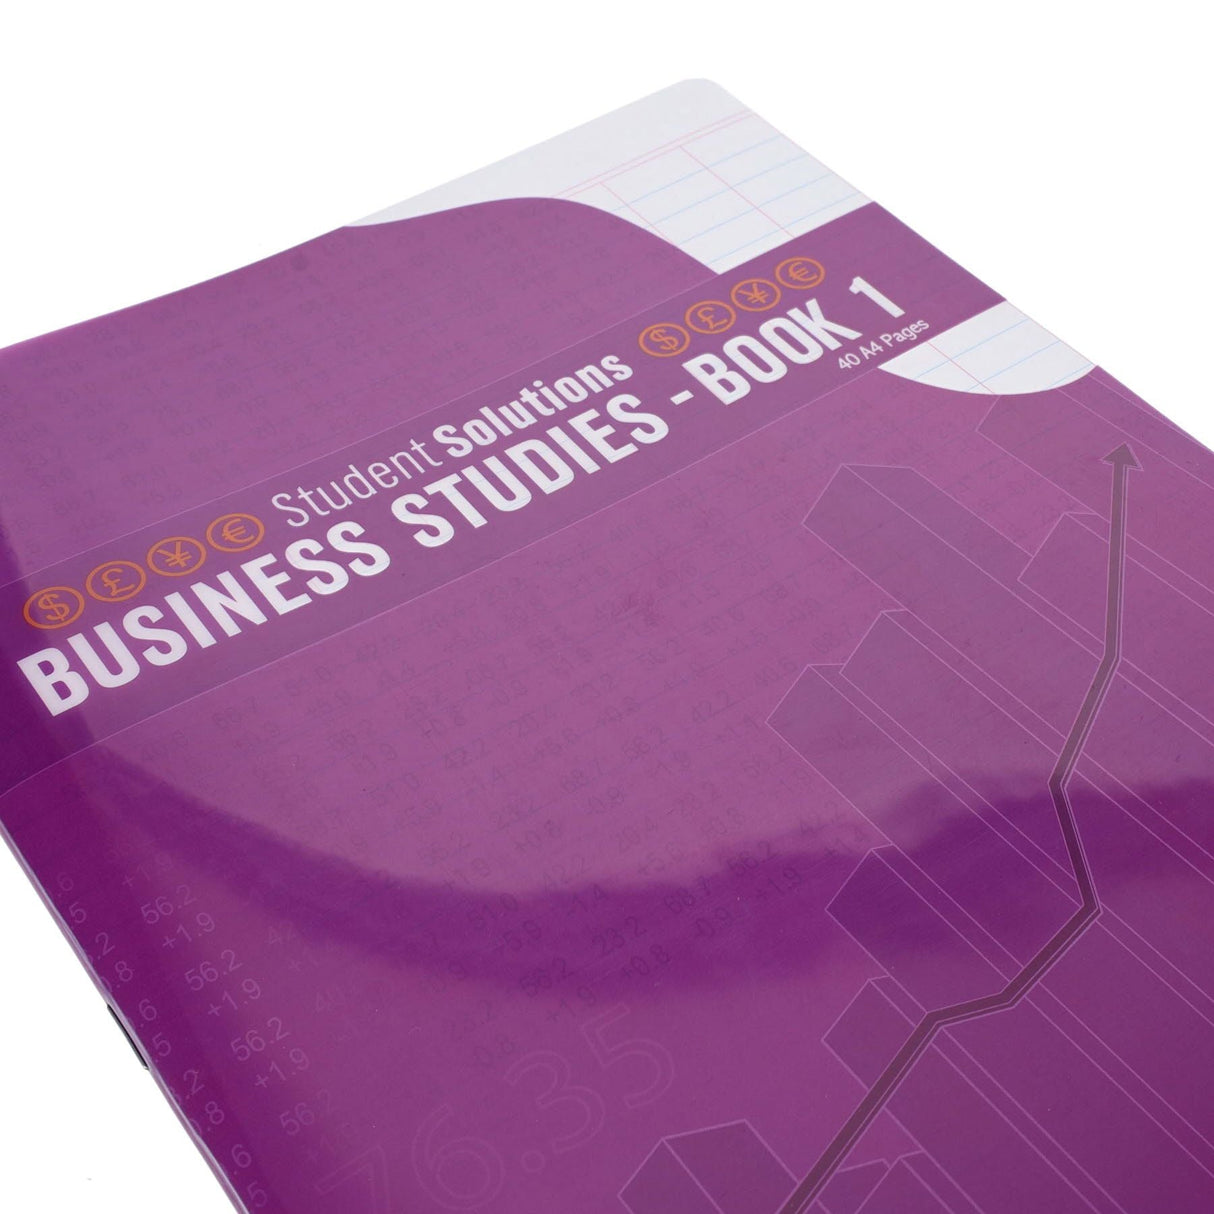 Student Solutions A4 Durable Cover Business Studies - 40 Pages - Book 1 | Stationery Shop UK